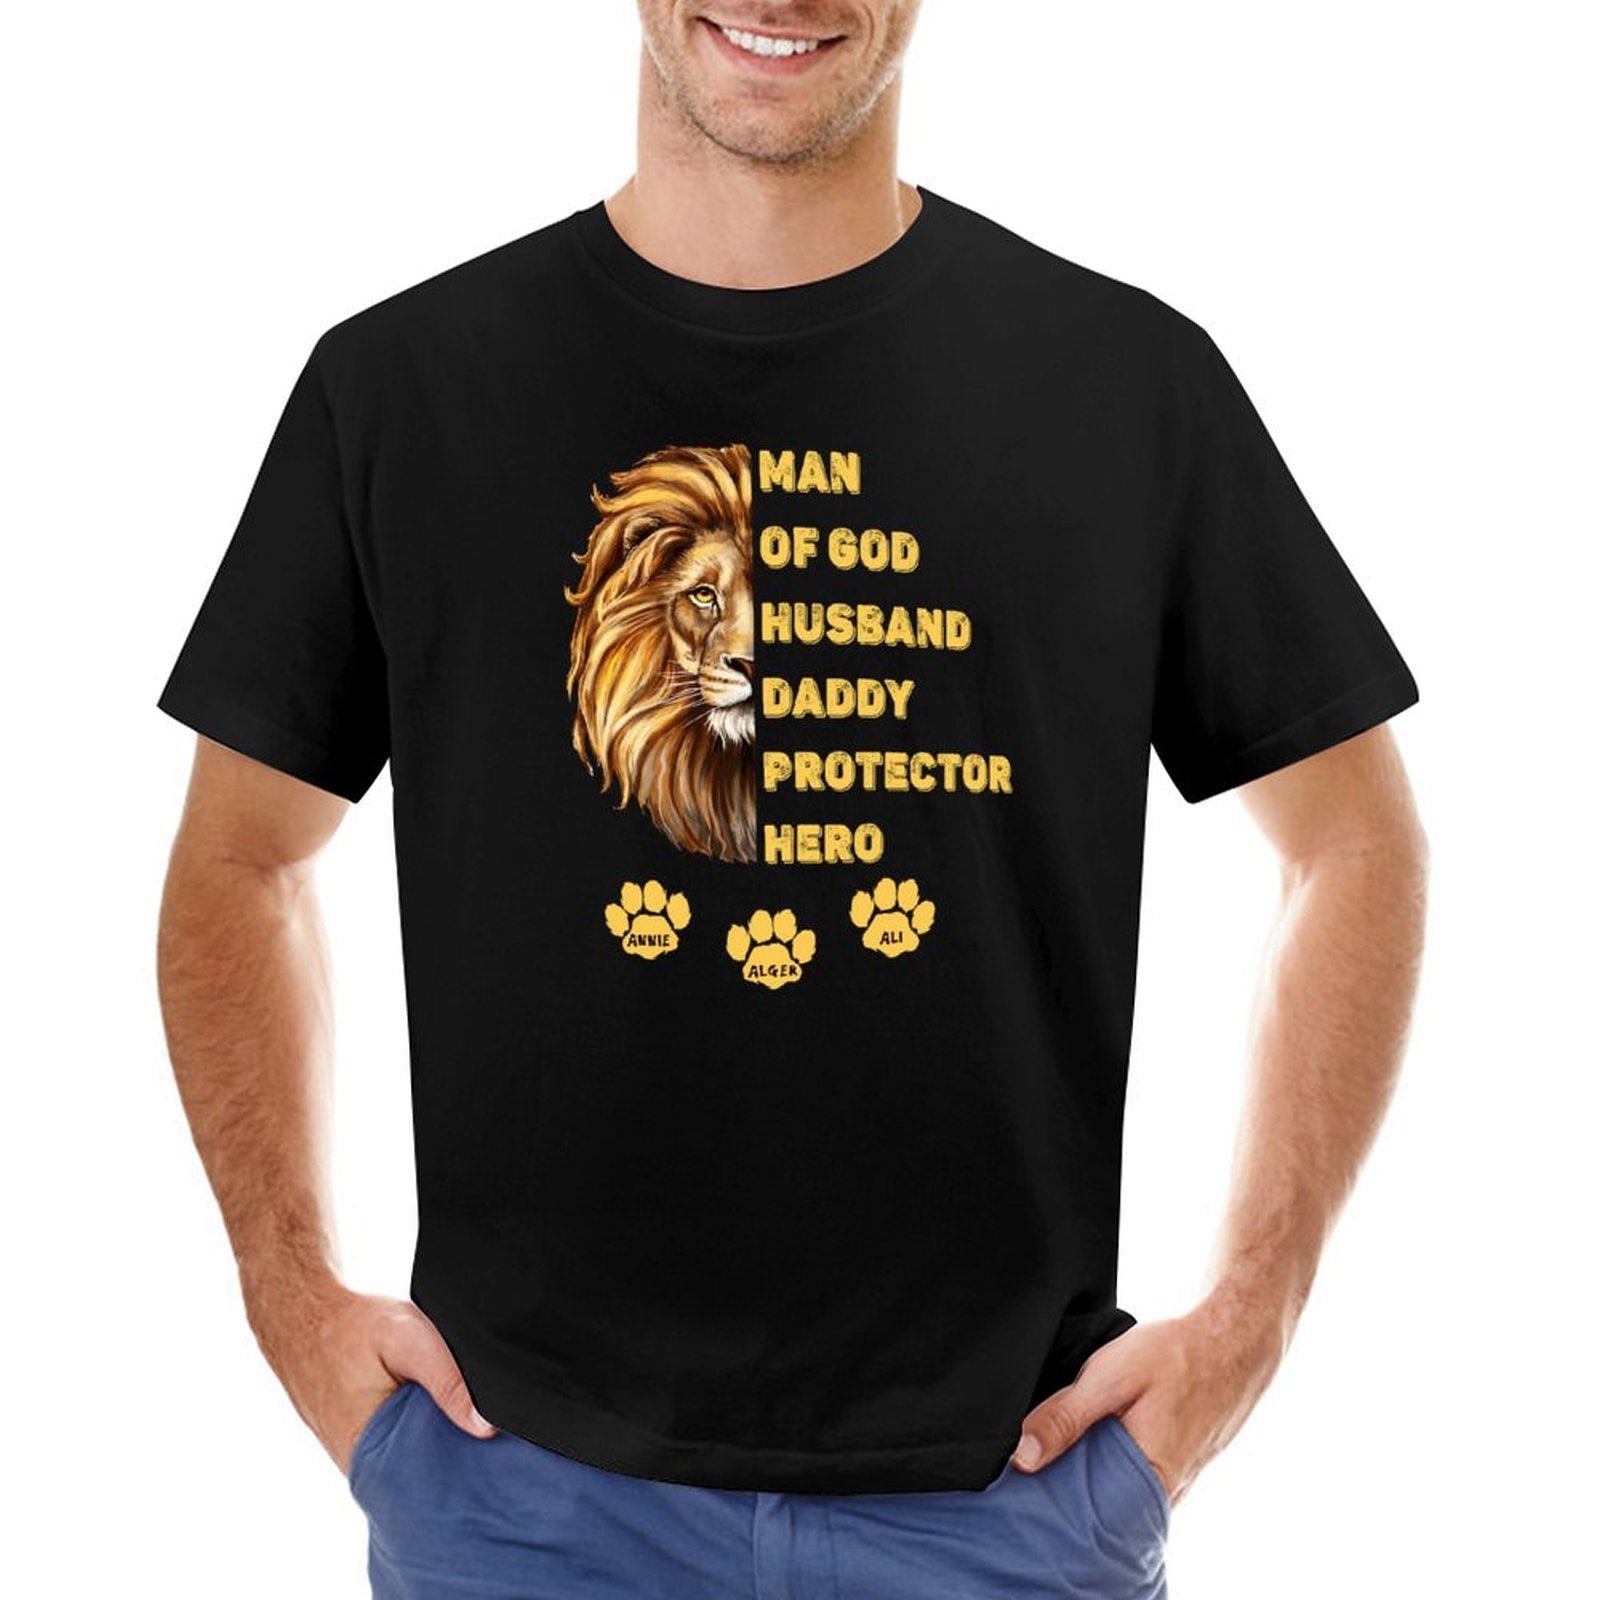 Personalized Custom T-Shirt For Men, Man of God Husband Daddy Protector Hero Tshirt - Dad Gift - Father's Day Tshirt - Husband Tshirt - colorfulcustom